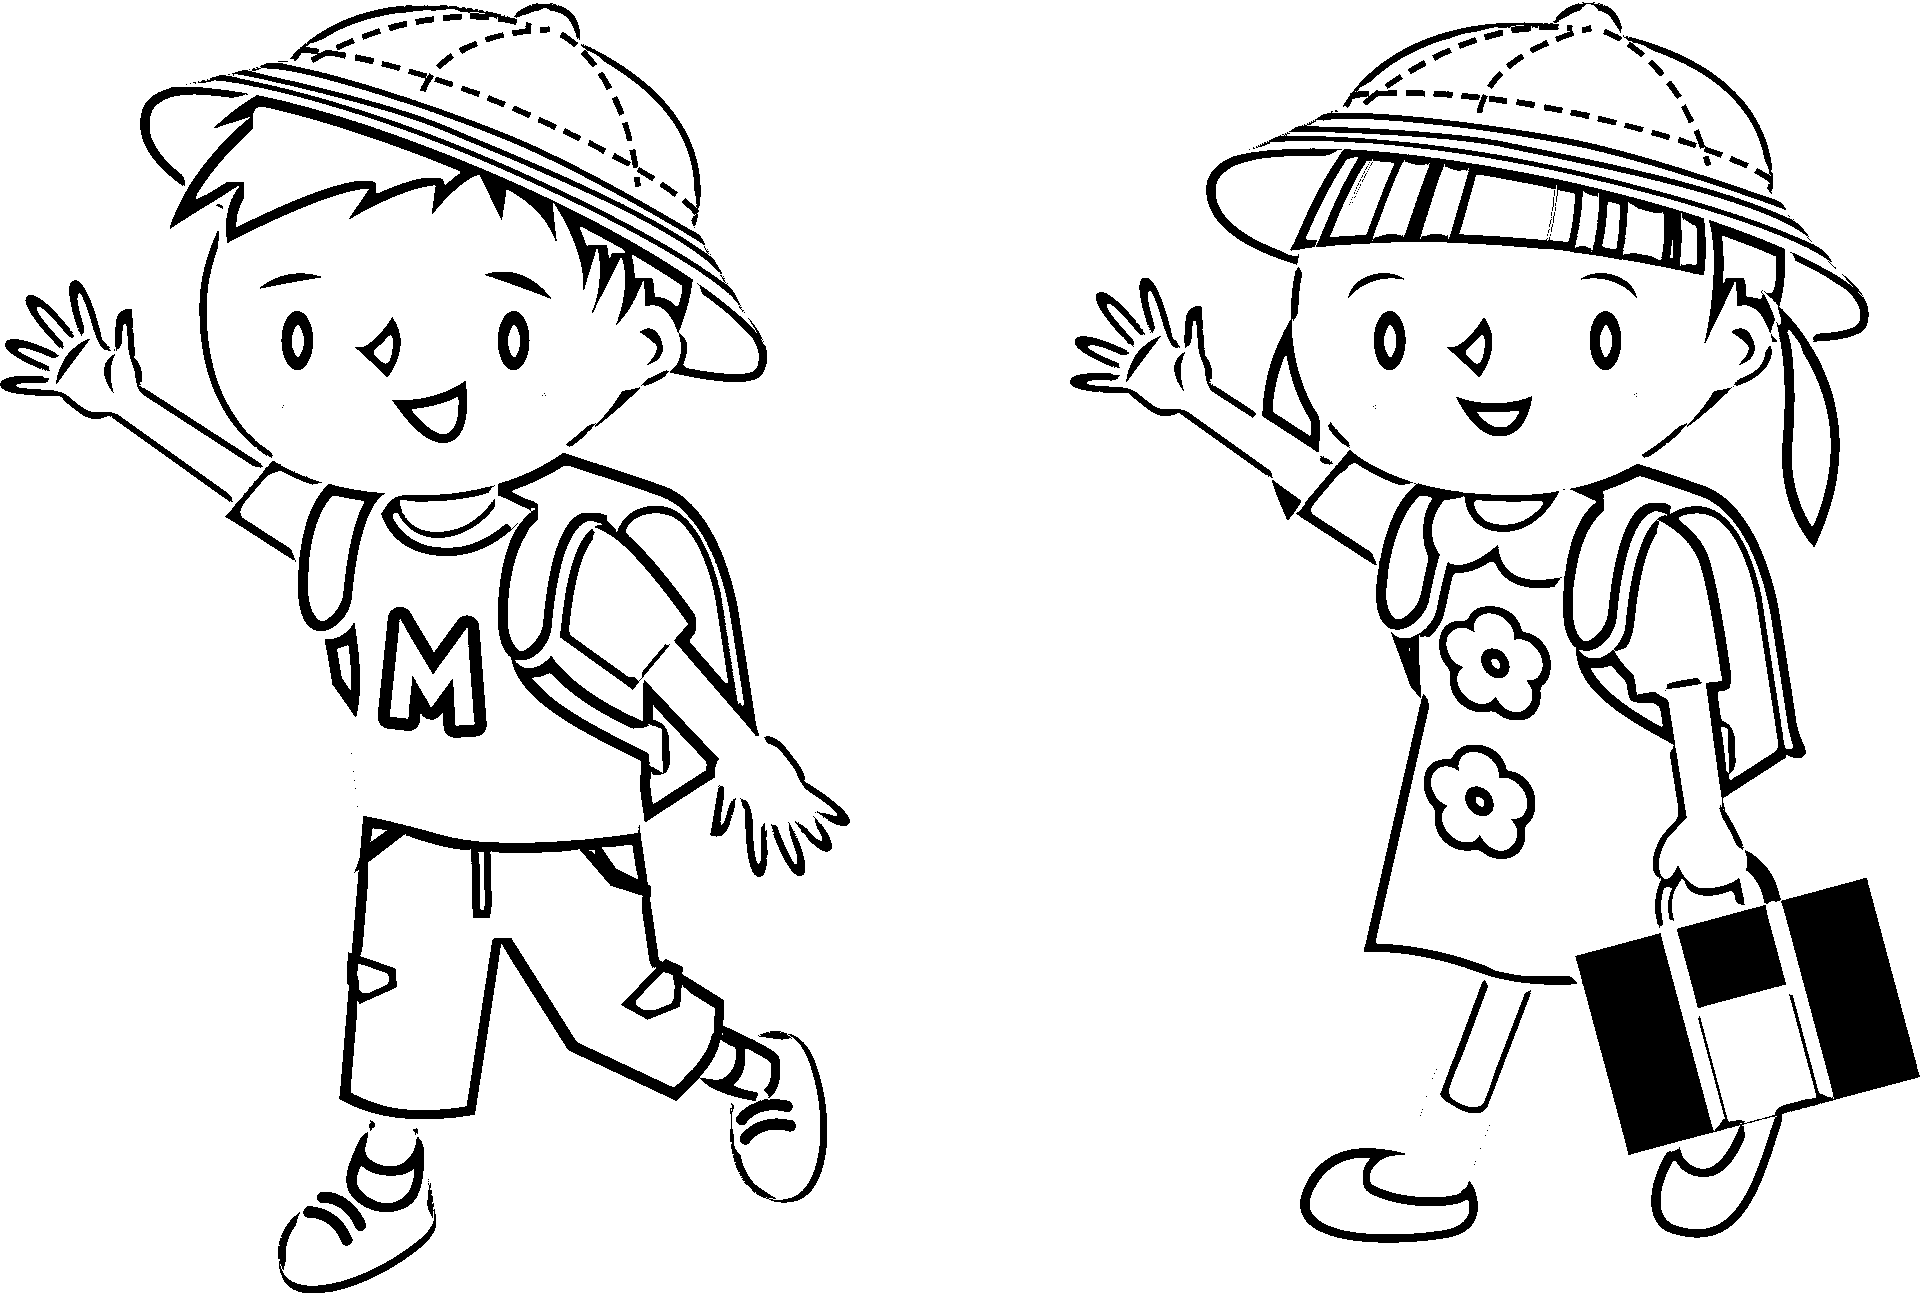 Coloring pages for kids going to school are printable